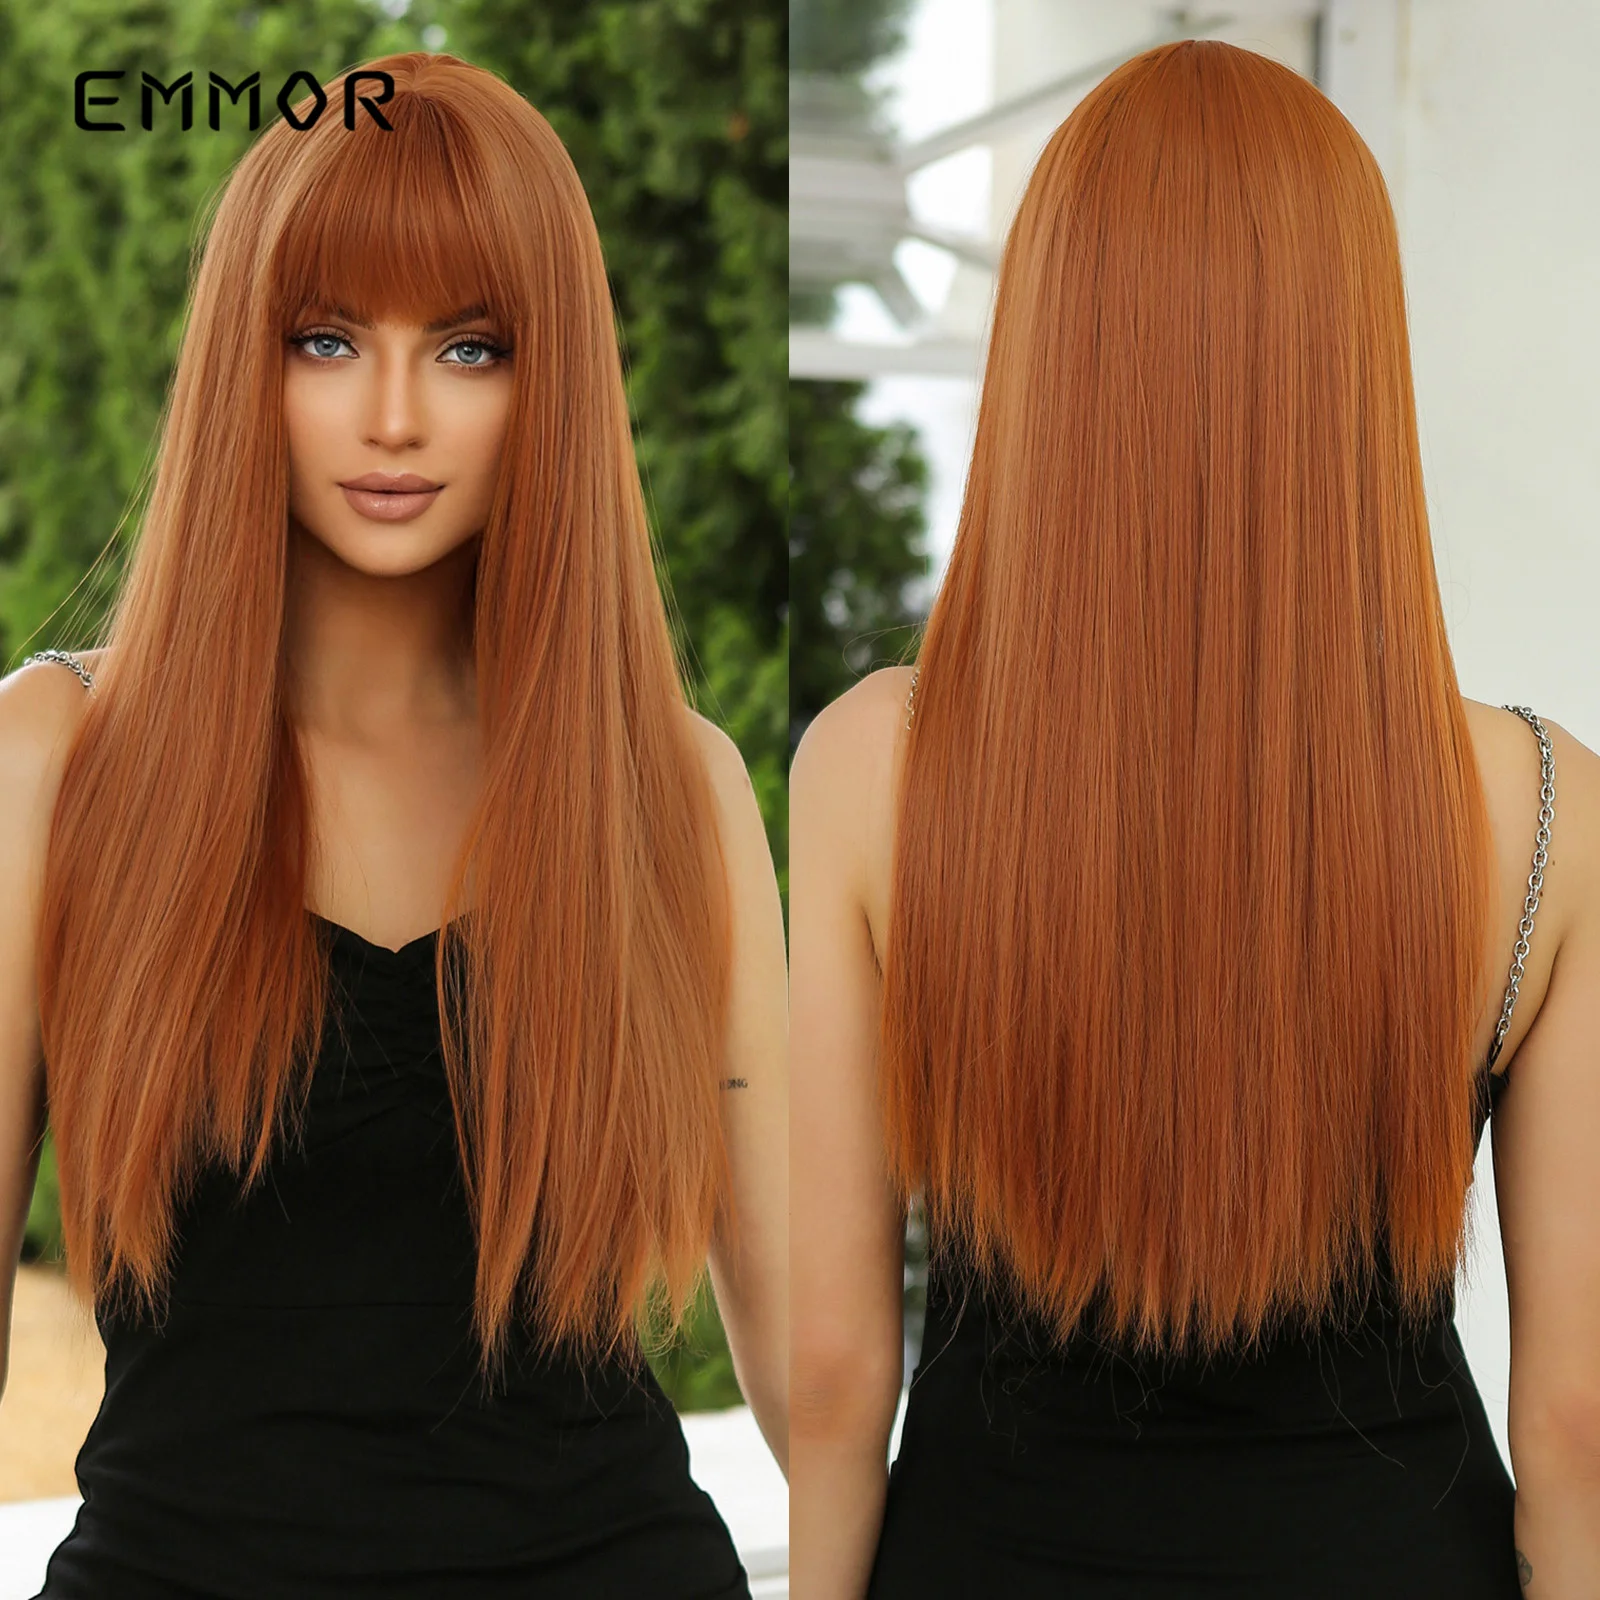 

Emmor Long Straight Wig with Bang Ombre Black Orange Wine Red Synthetic Wigs For Women Heat Resistant Hair Layered Cosplay Daily